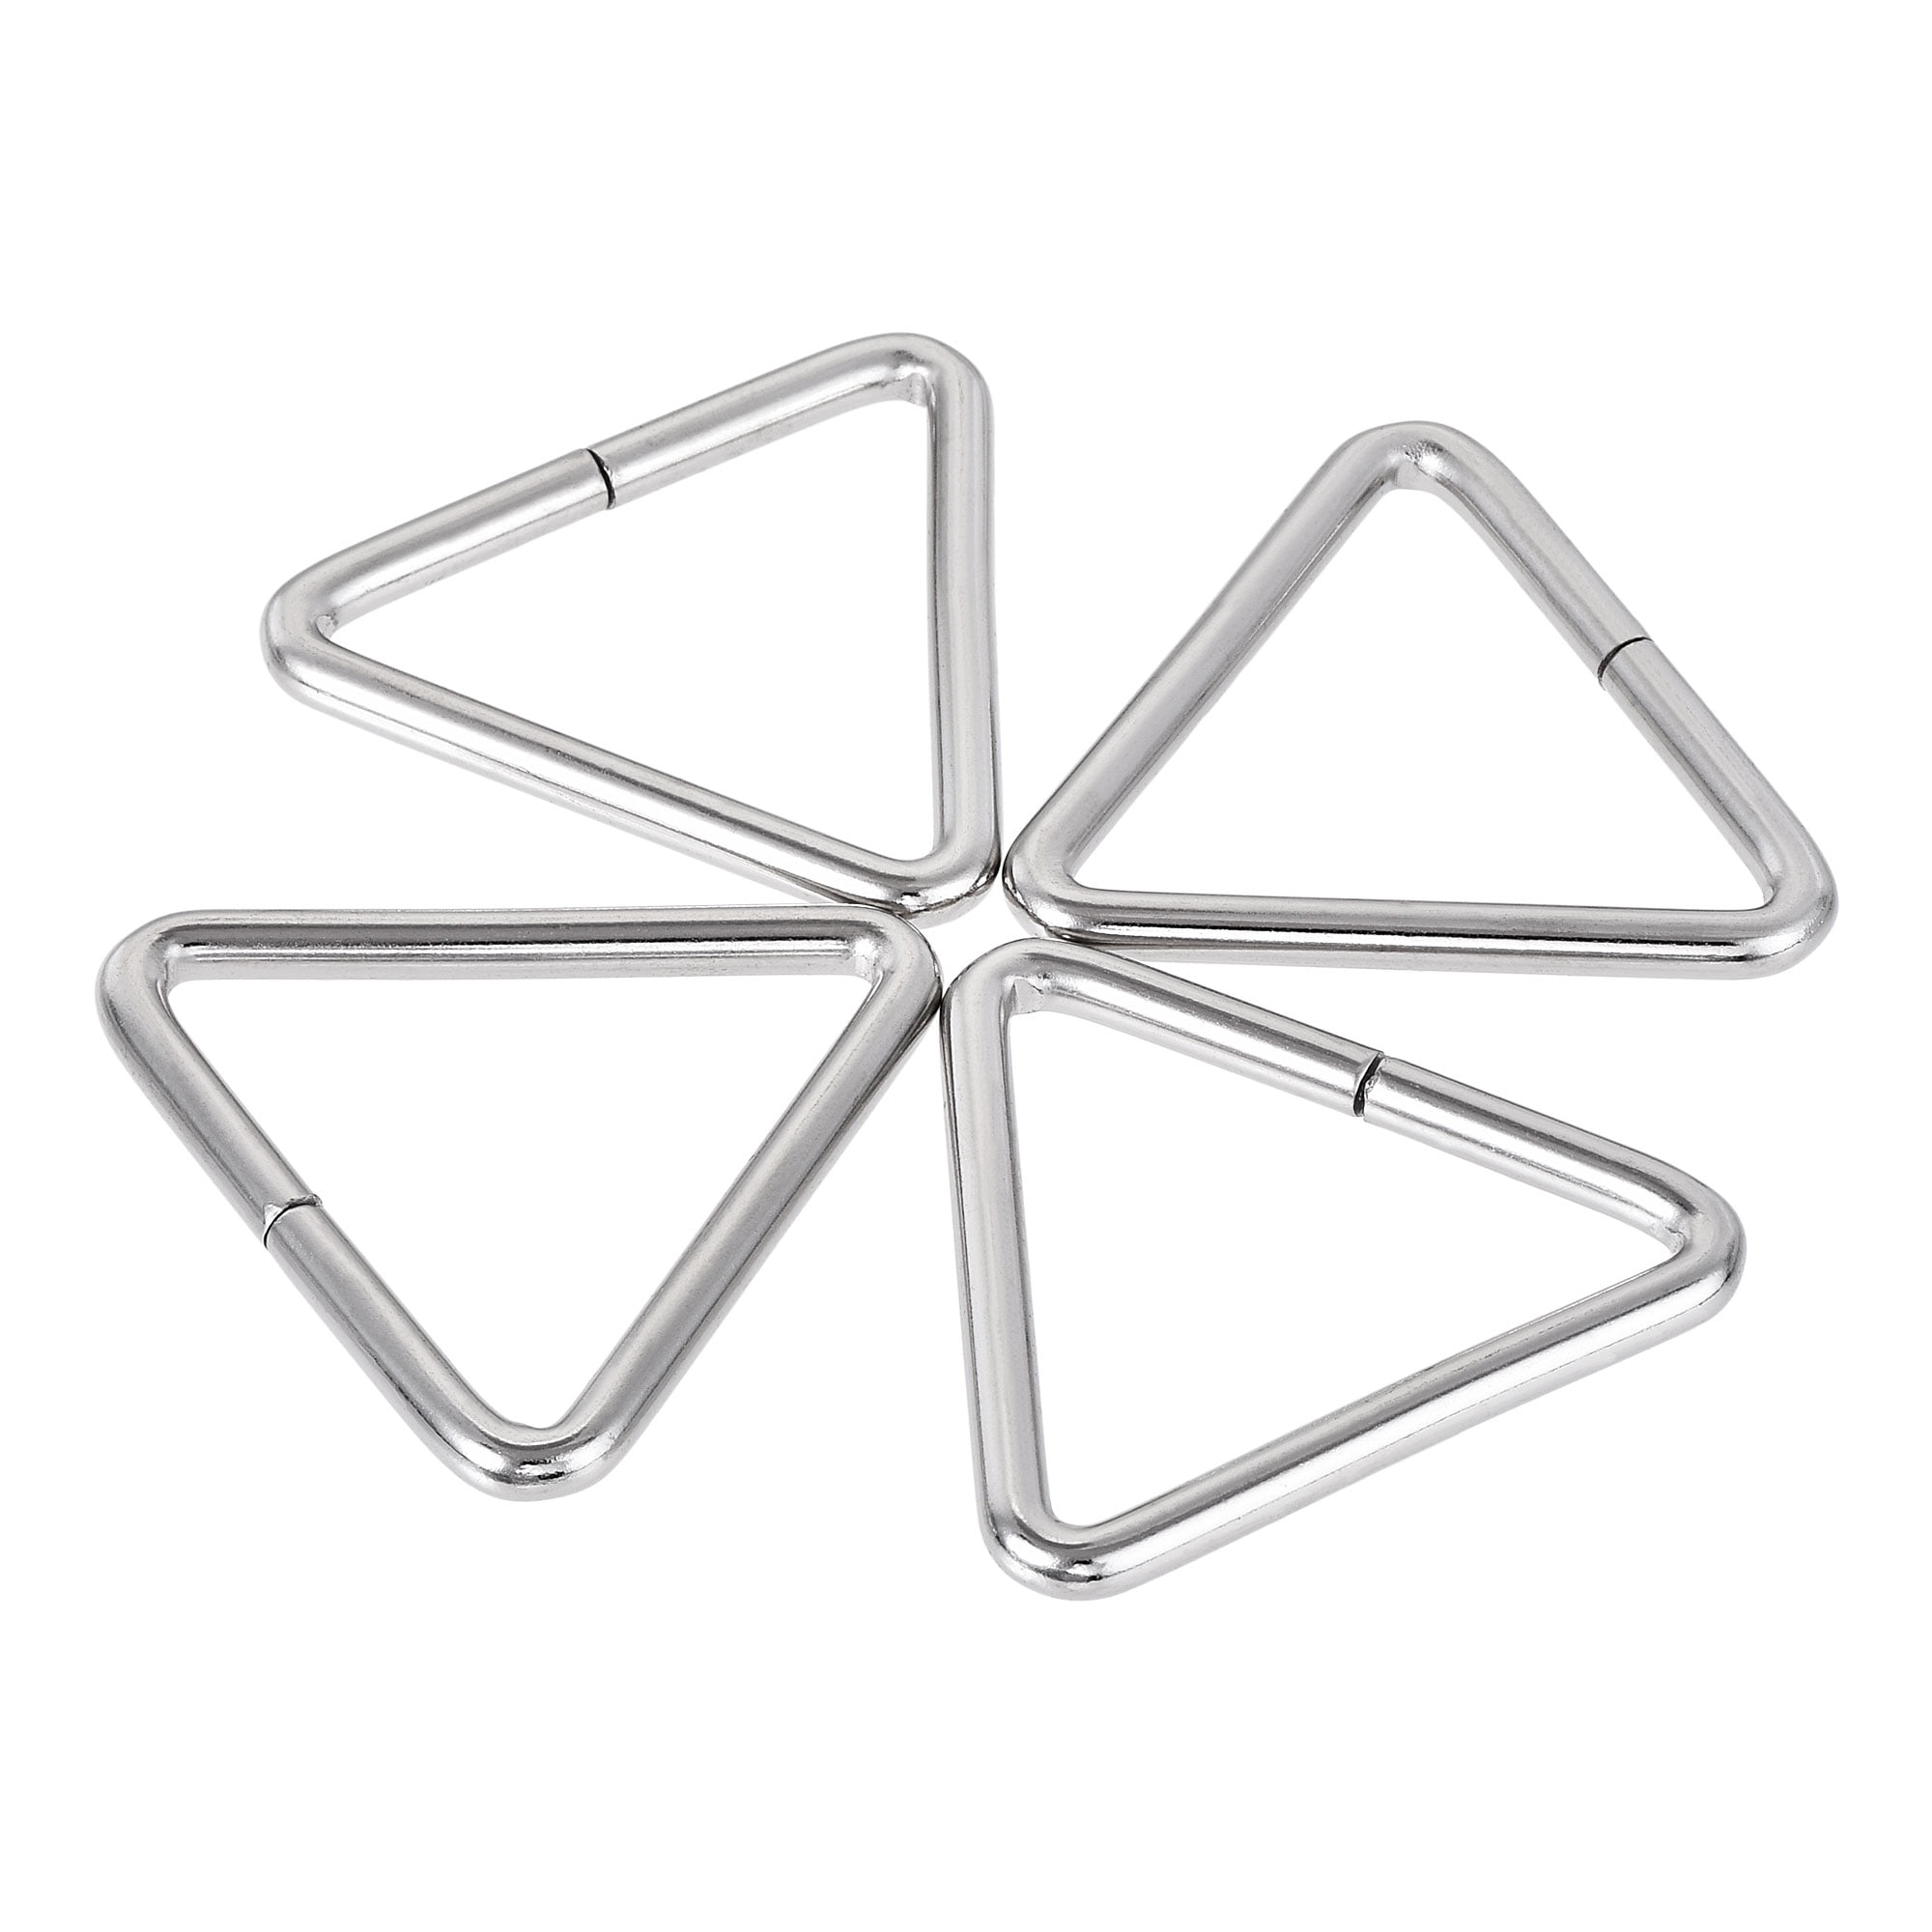 Uxcell 50mm Inner Width Metal Triangle Ring Buckle 4 Pack